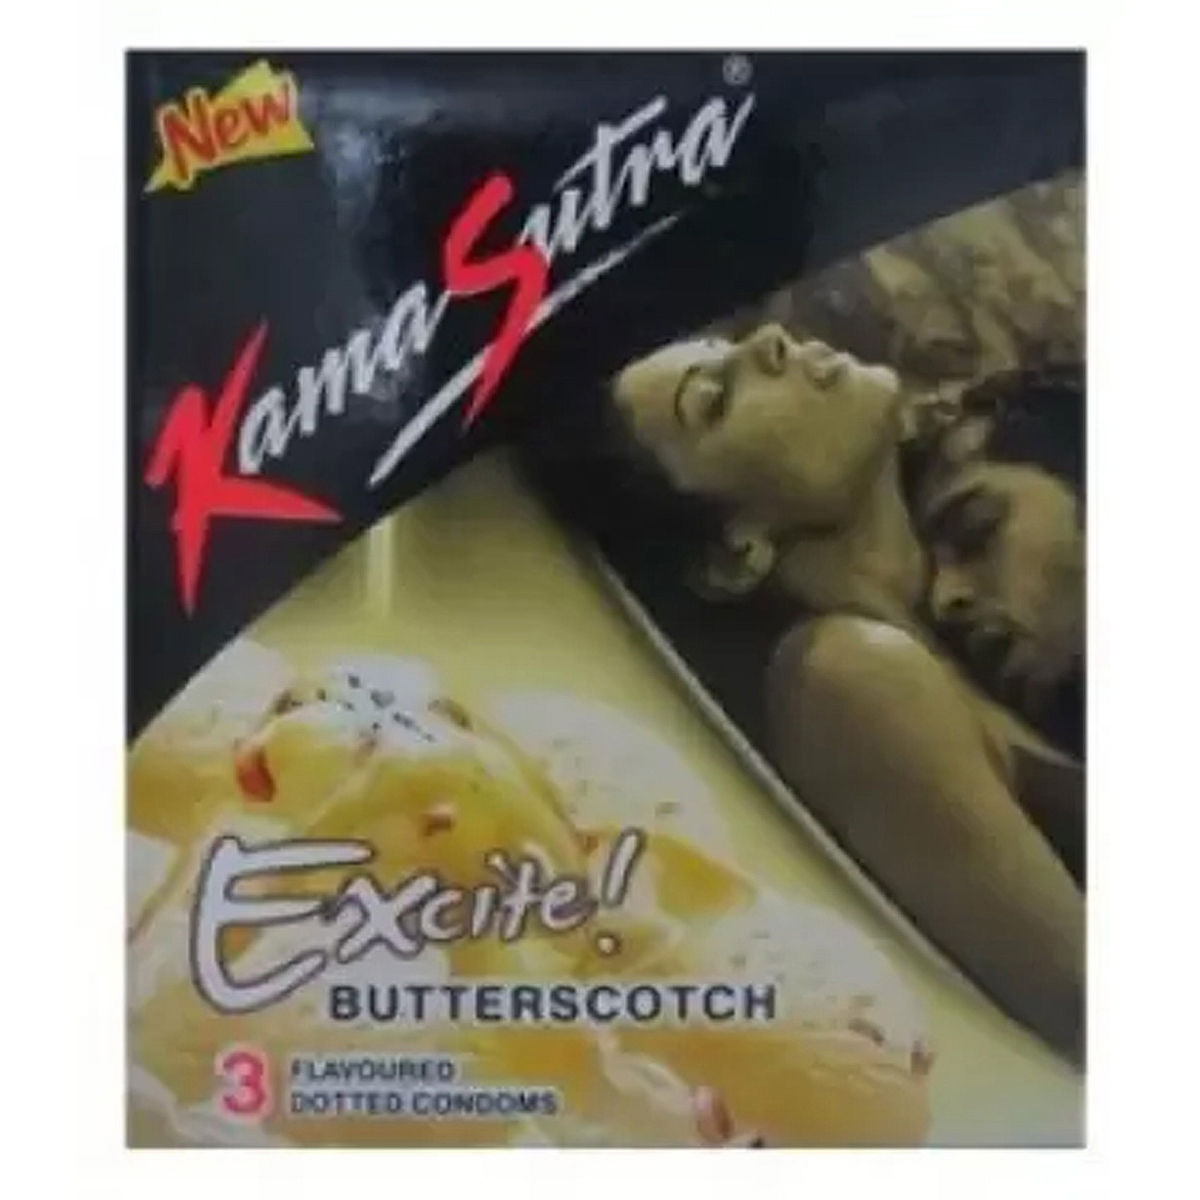 Buy Kamasutra Excite Butterscotch Condoms, 3 Count Online